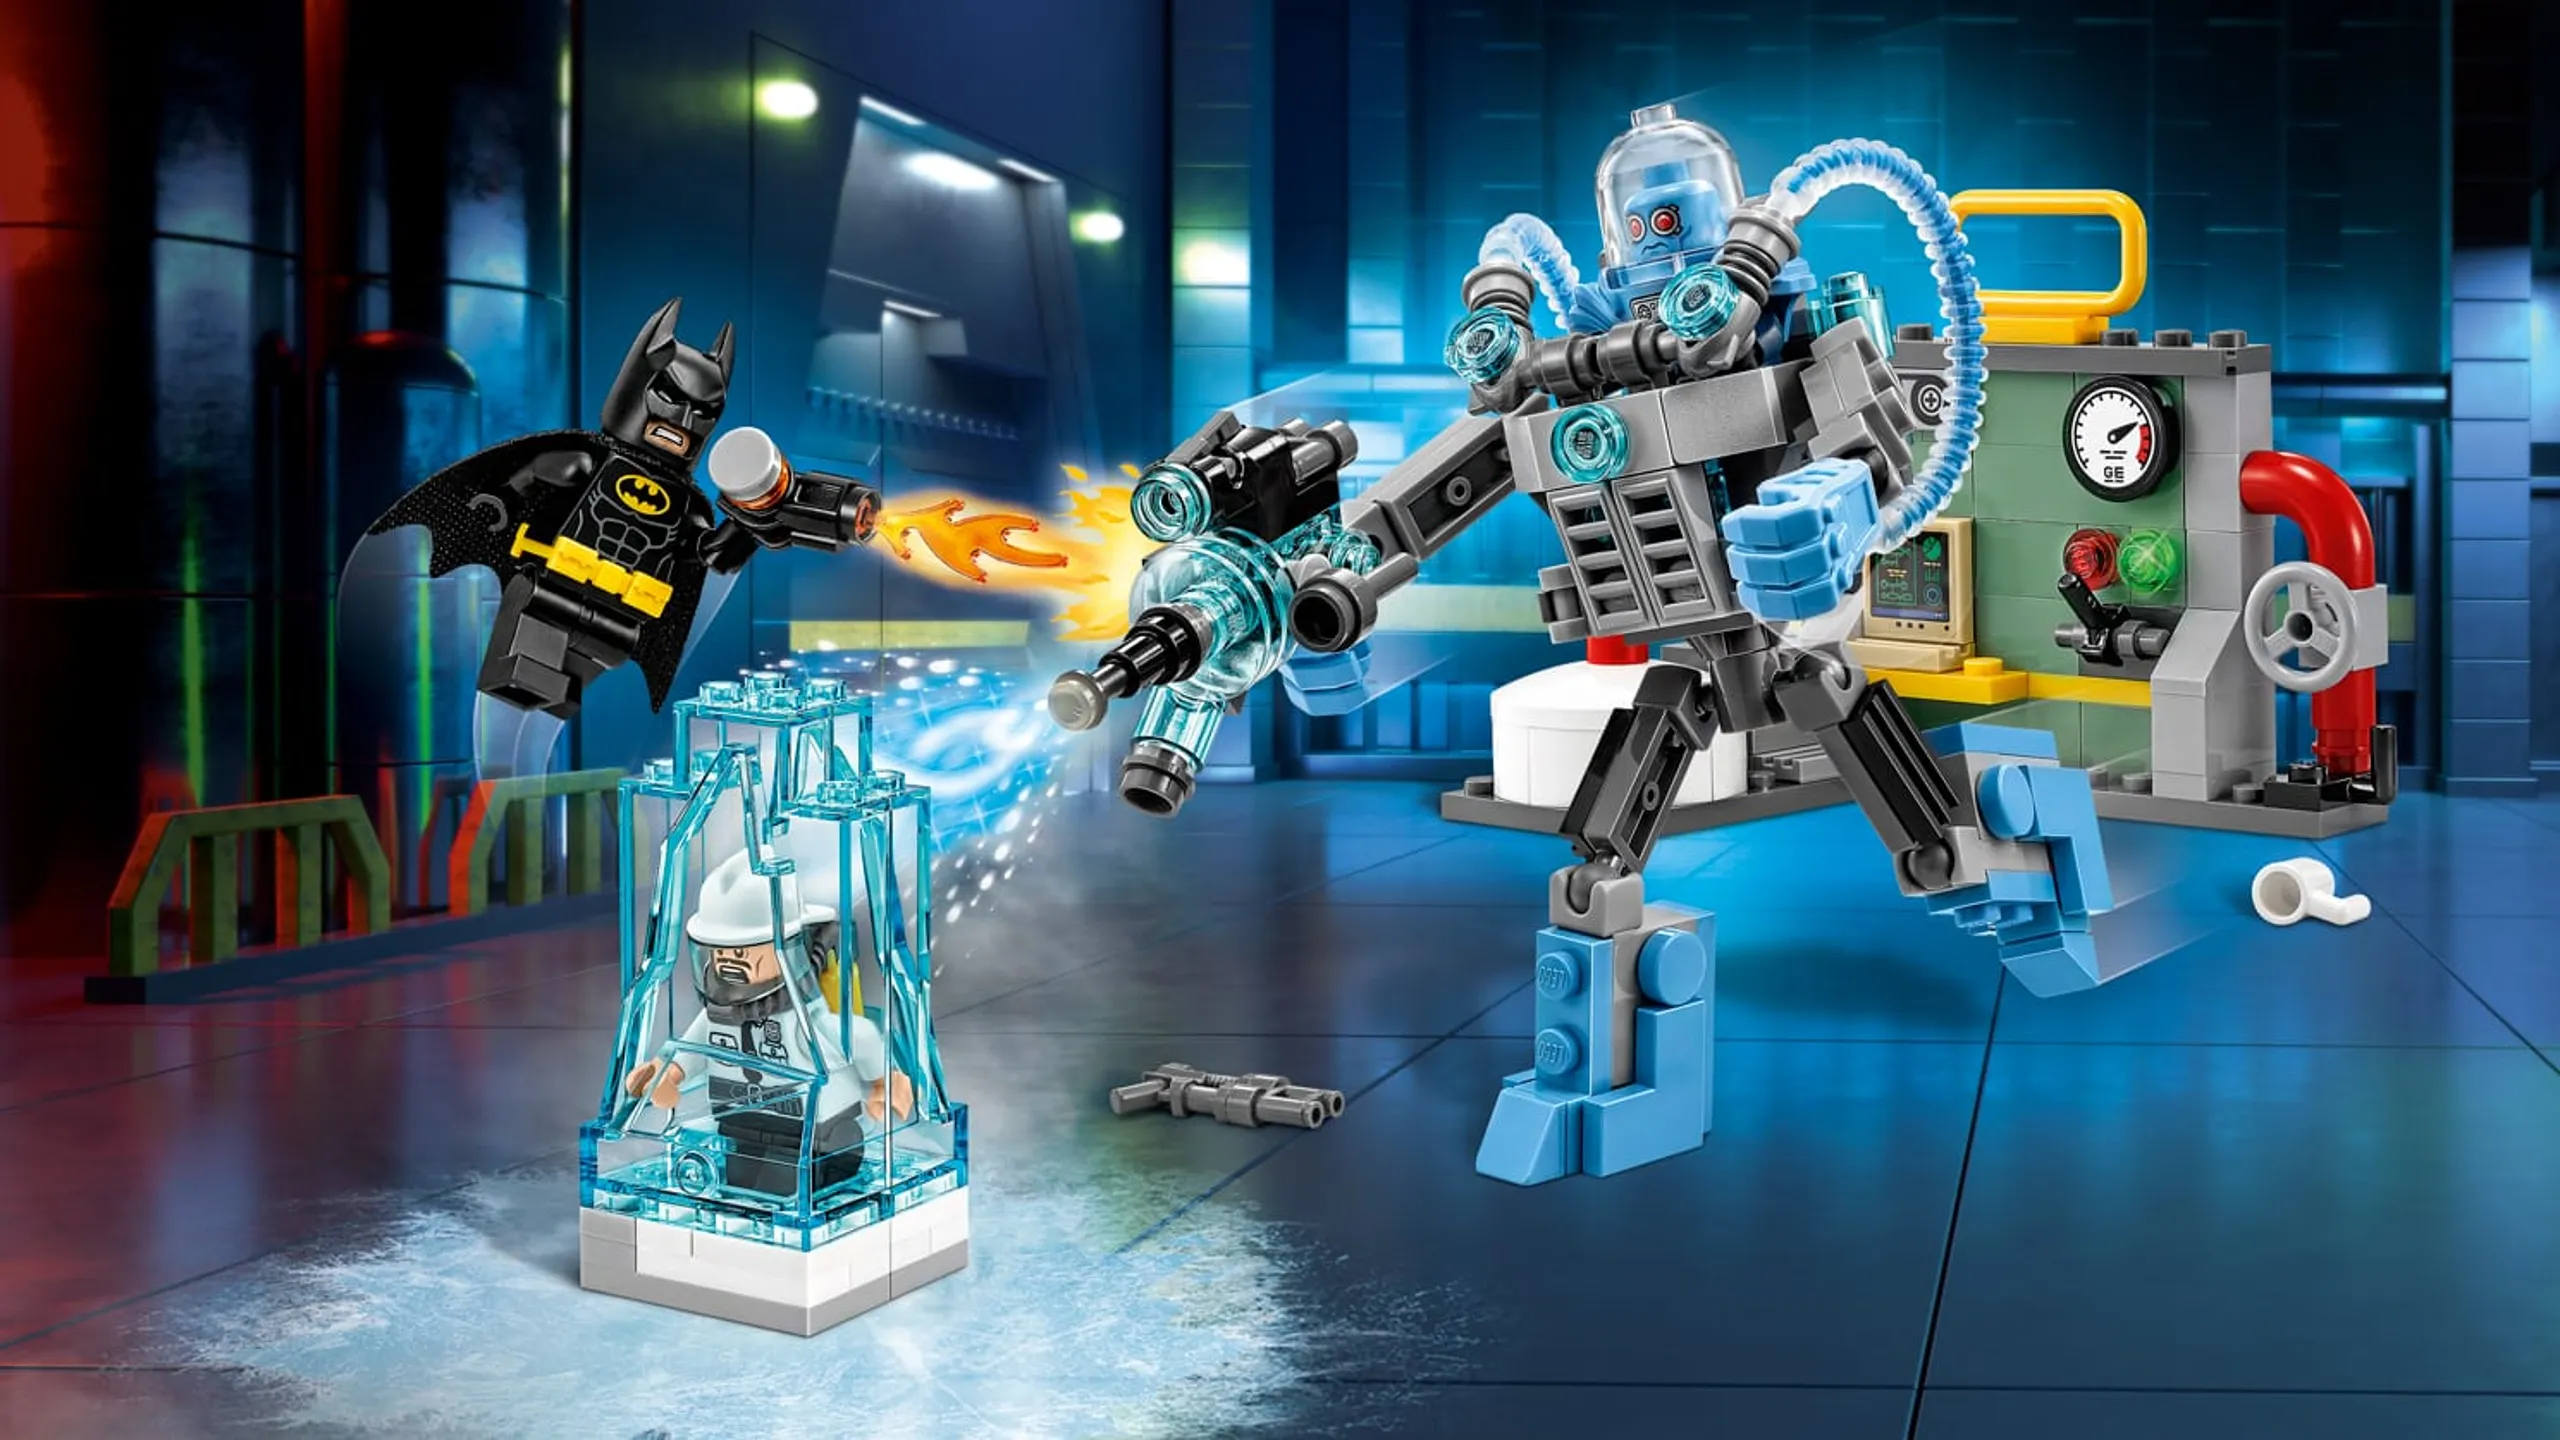 LEGO Batman Movie Mr Freeze Ice Attack – 70901 – Batman fights Mr Freeze, who has freezed an officer, with fire in an abandoned factory